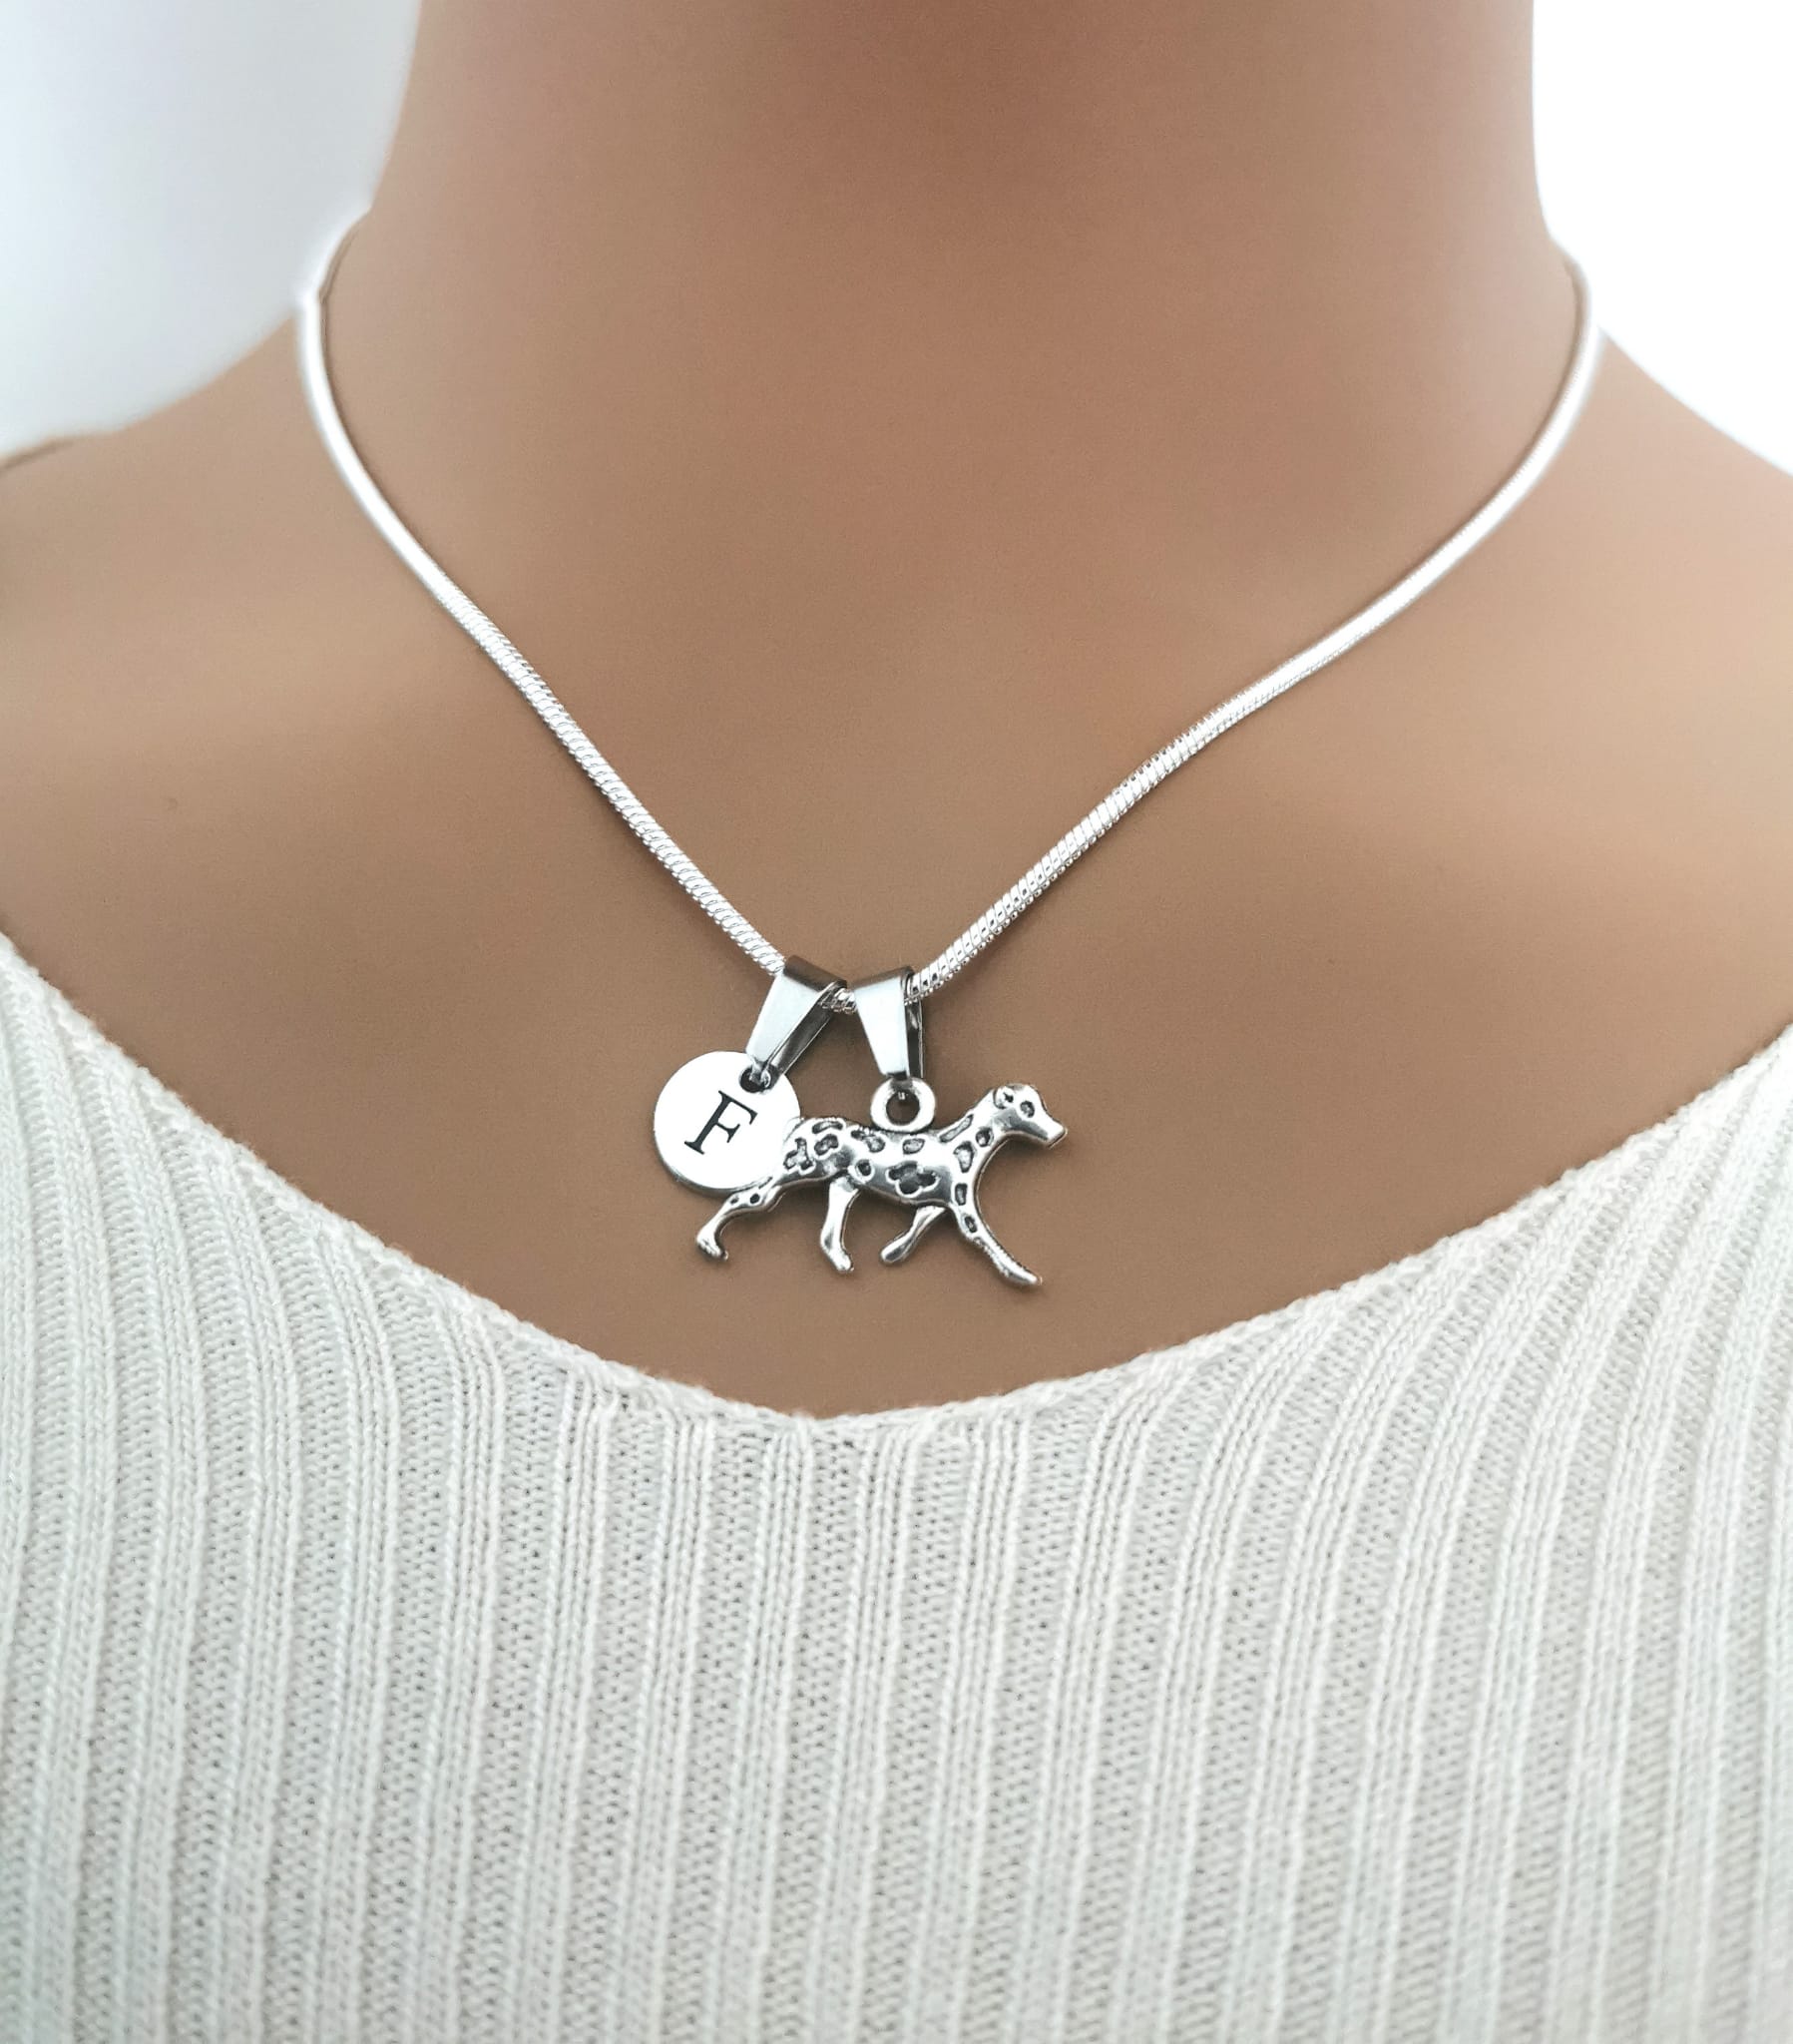 Silver Dalmatian Necklace - A Stylish and Elegant Tribute to Your Four-Legged Friend